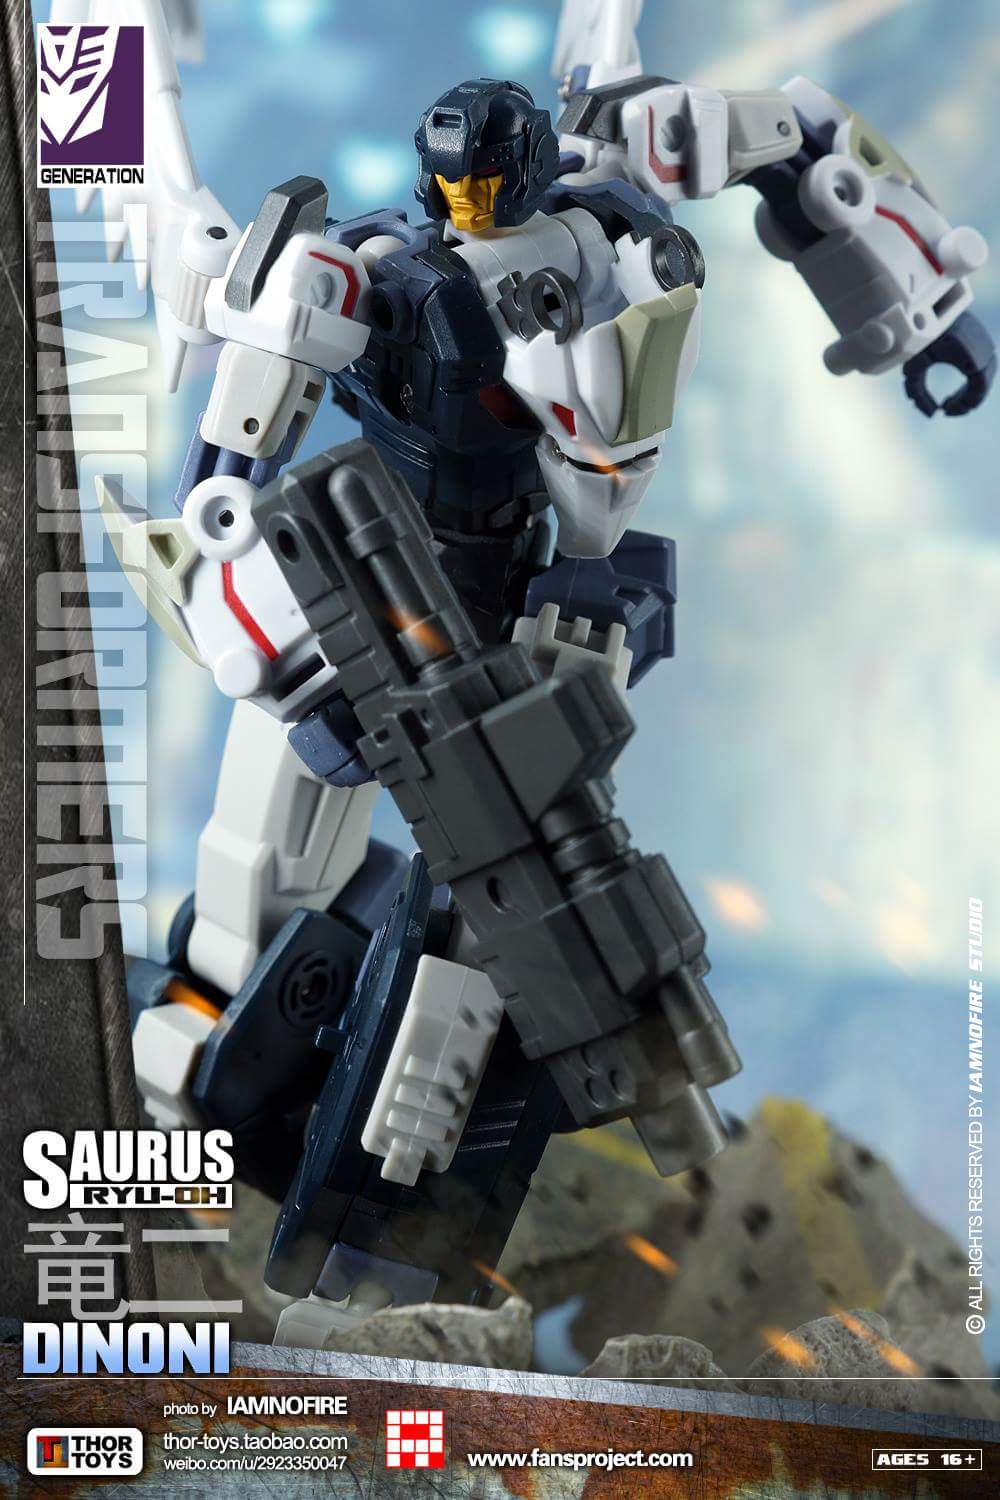 [FansProject] Produit Tiers - Ryu-Oh aka Dinoking (Victory) | Beastructor aka Monstructor (USA) - Page 2 LHttvbmI